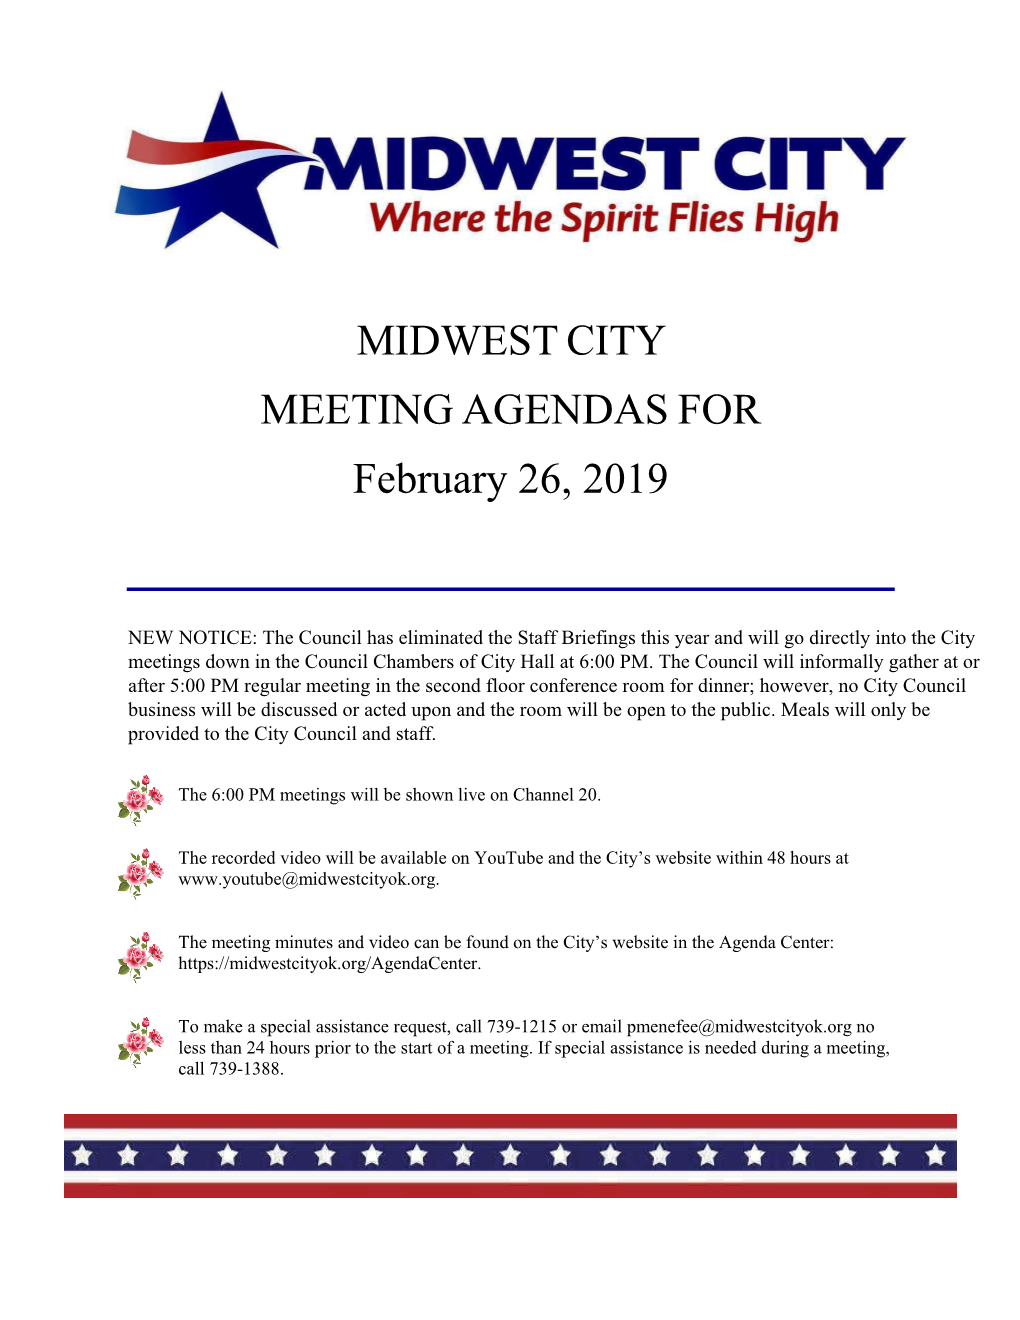 MIDWEST CITY MEETING AGENDAS for February 26, 2019